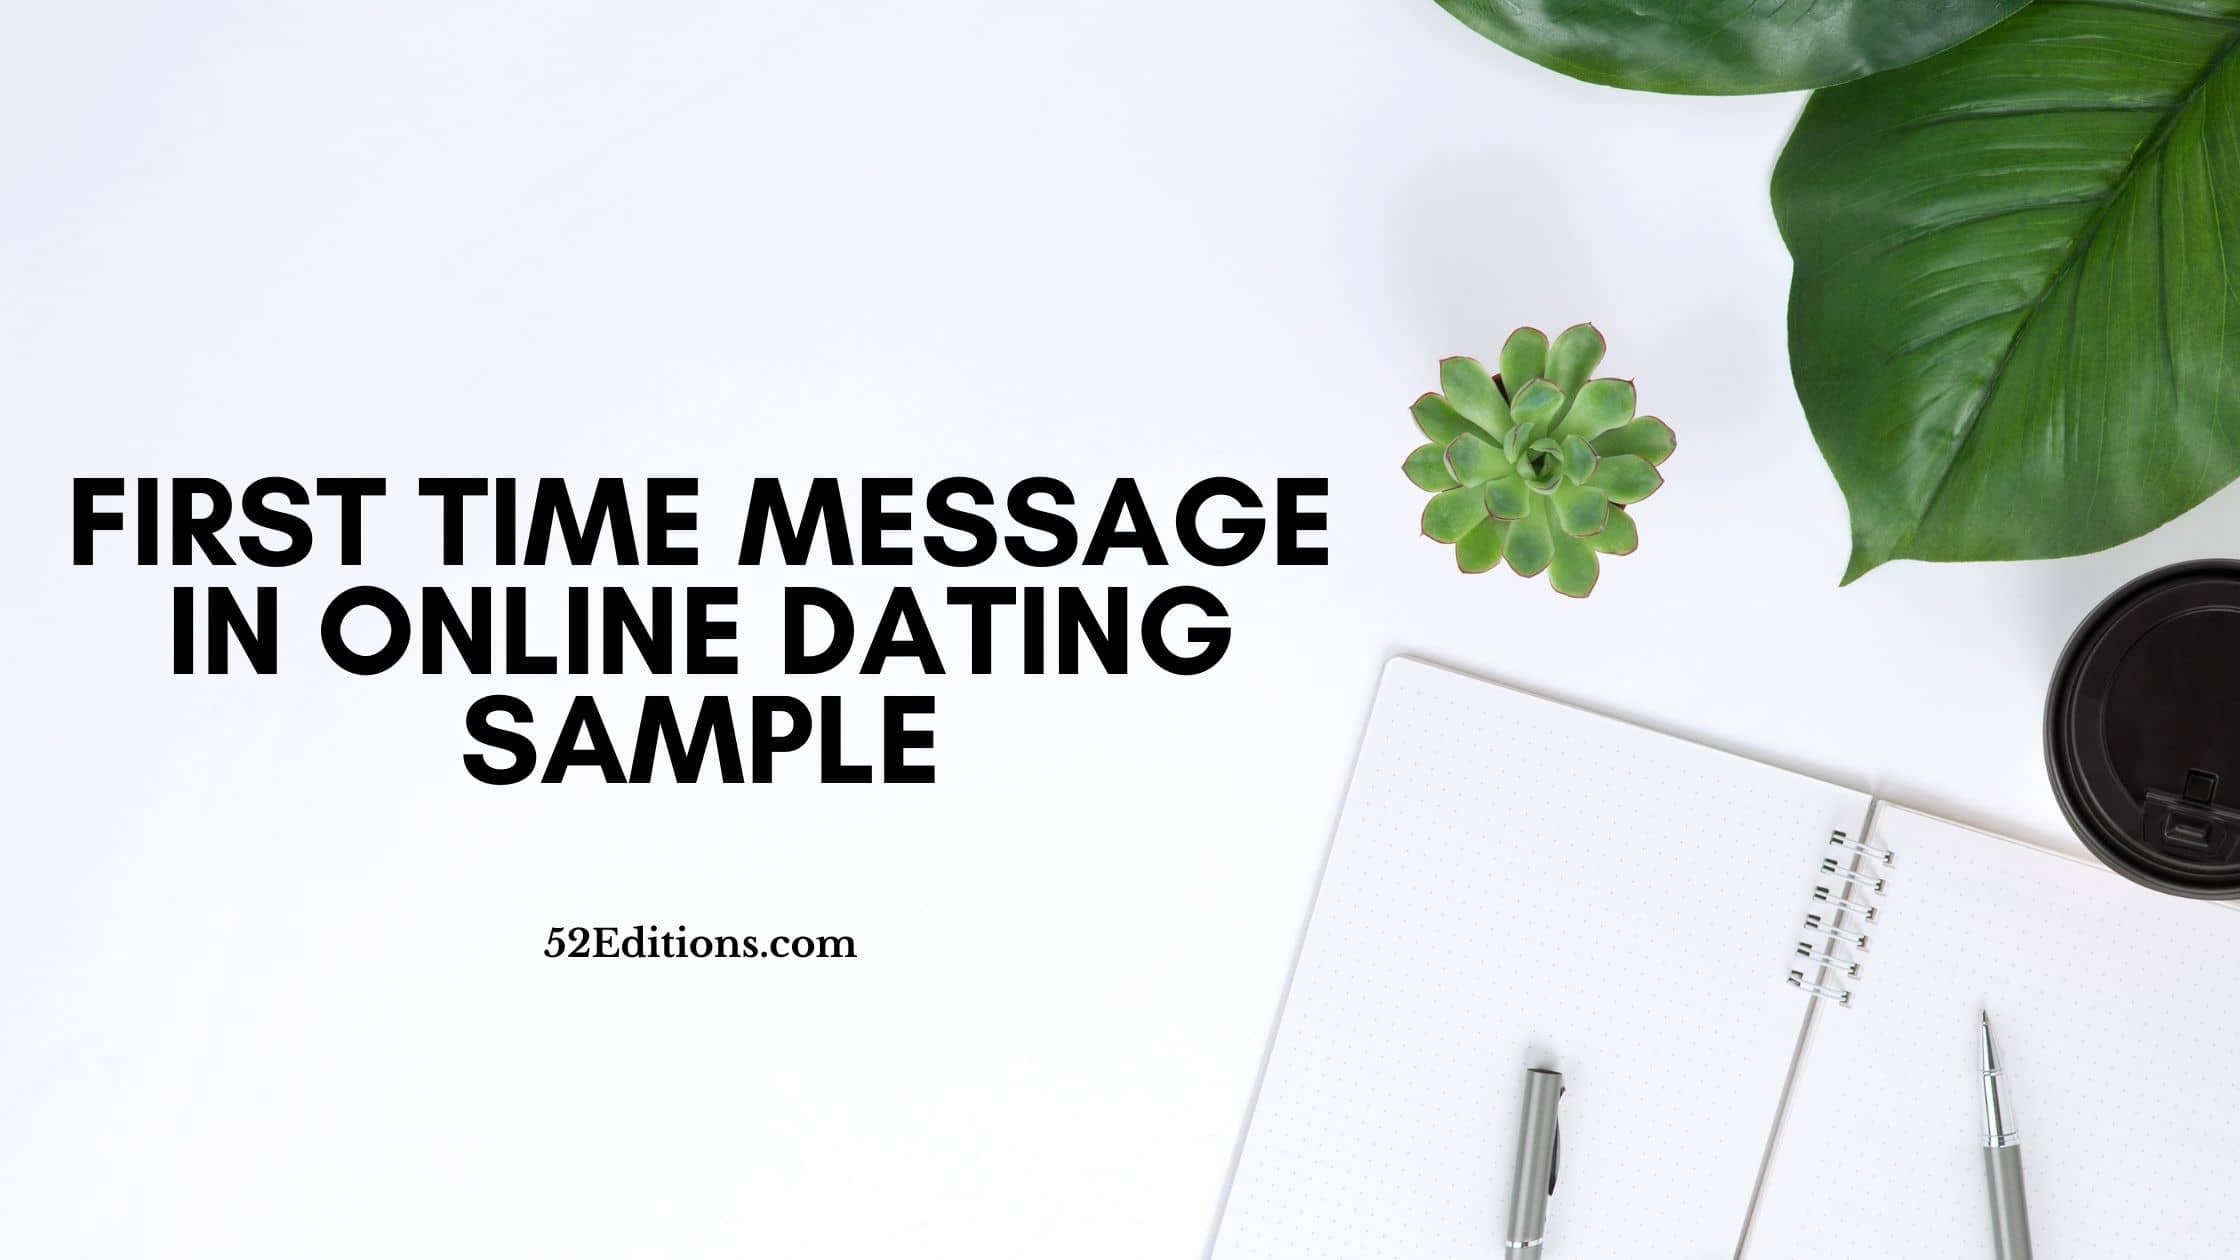 First Time Message in Online Dating Sample // Get FREE Letter Templates